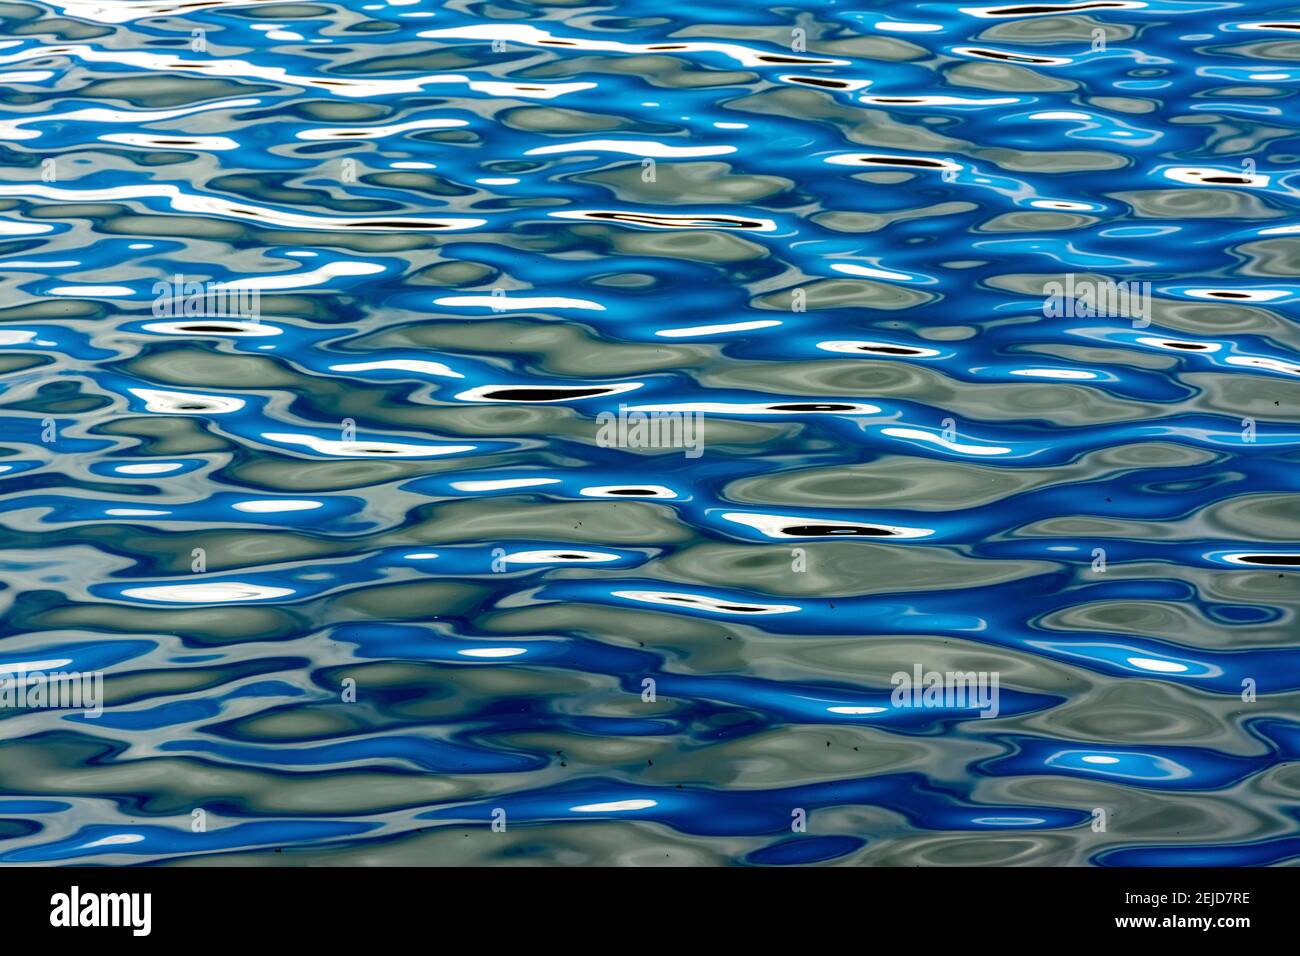 Patterns reflected on a water surface Stock Photo